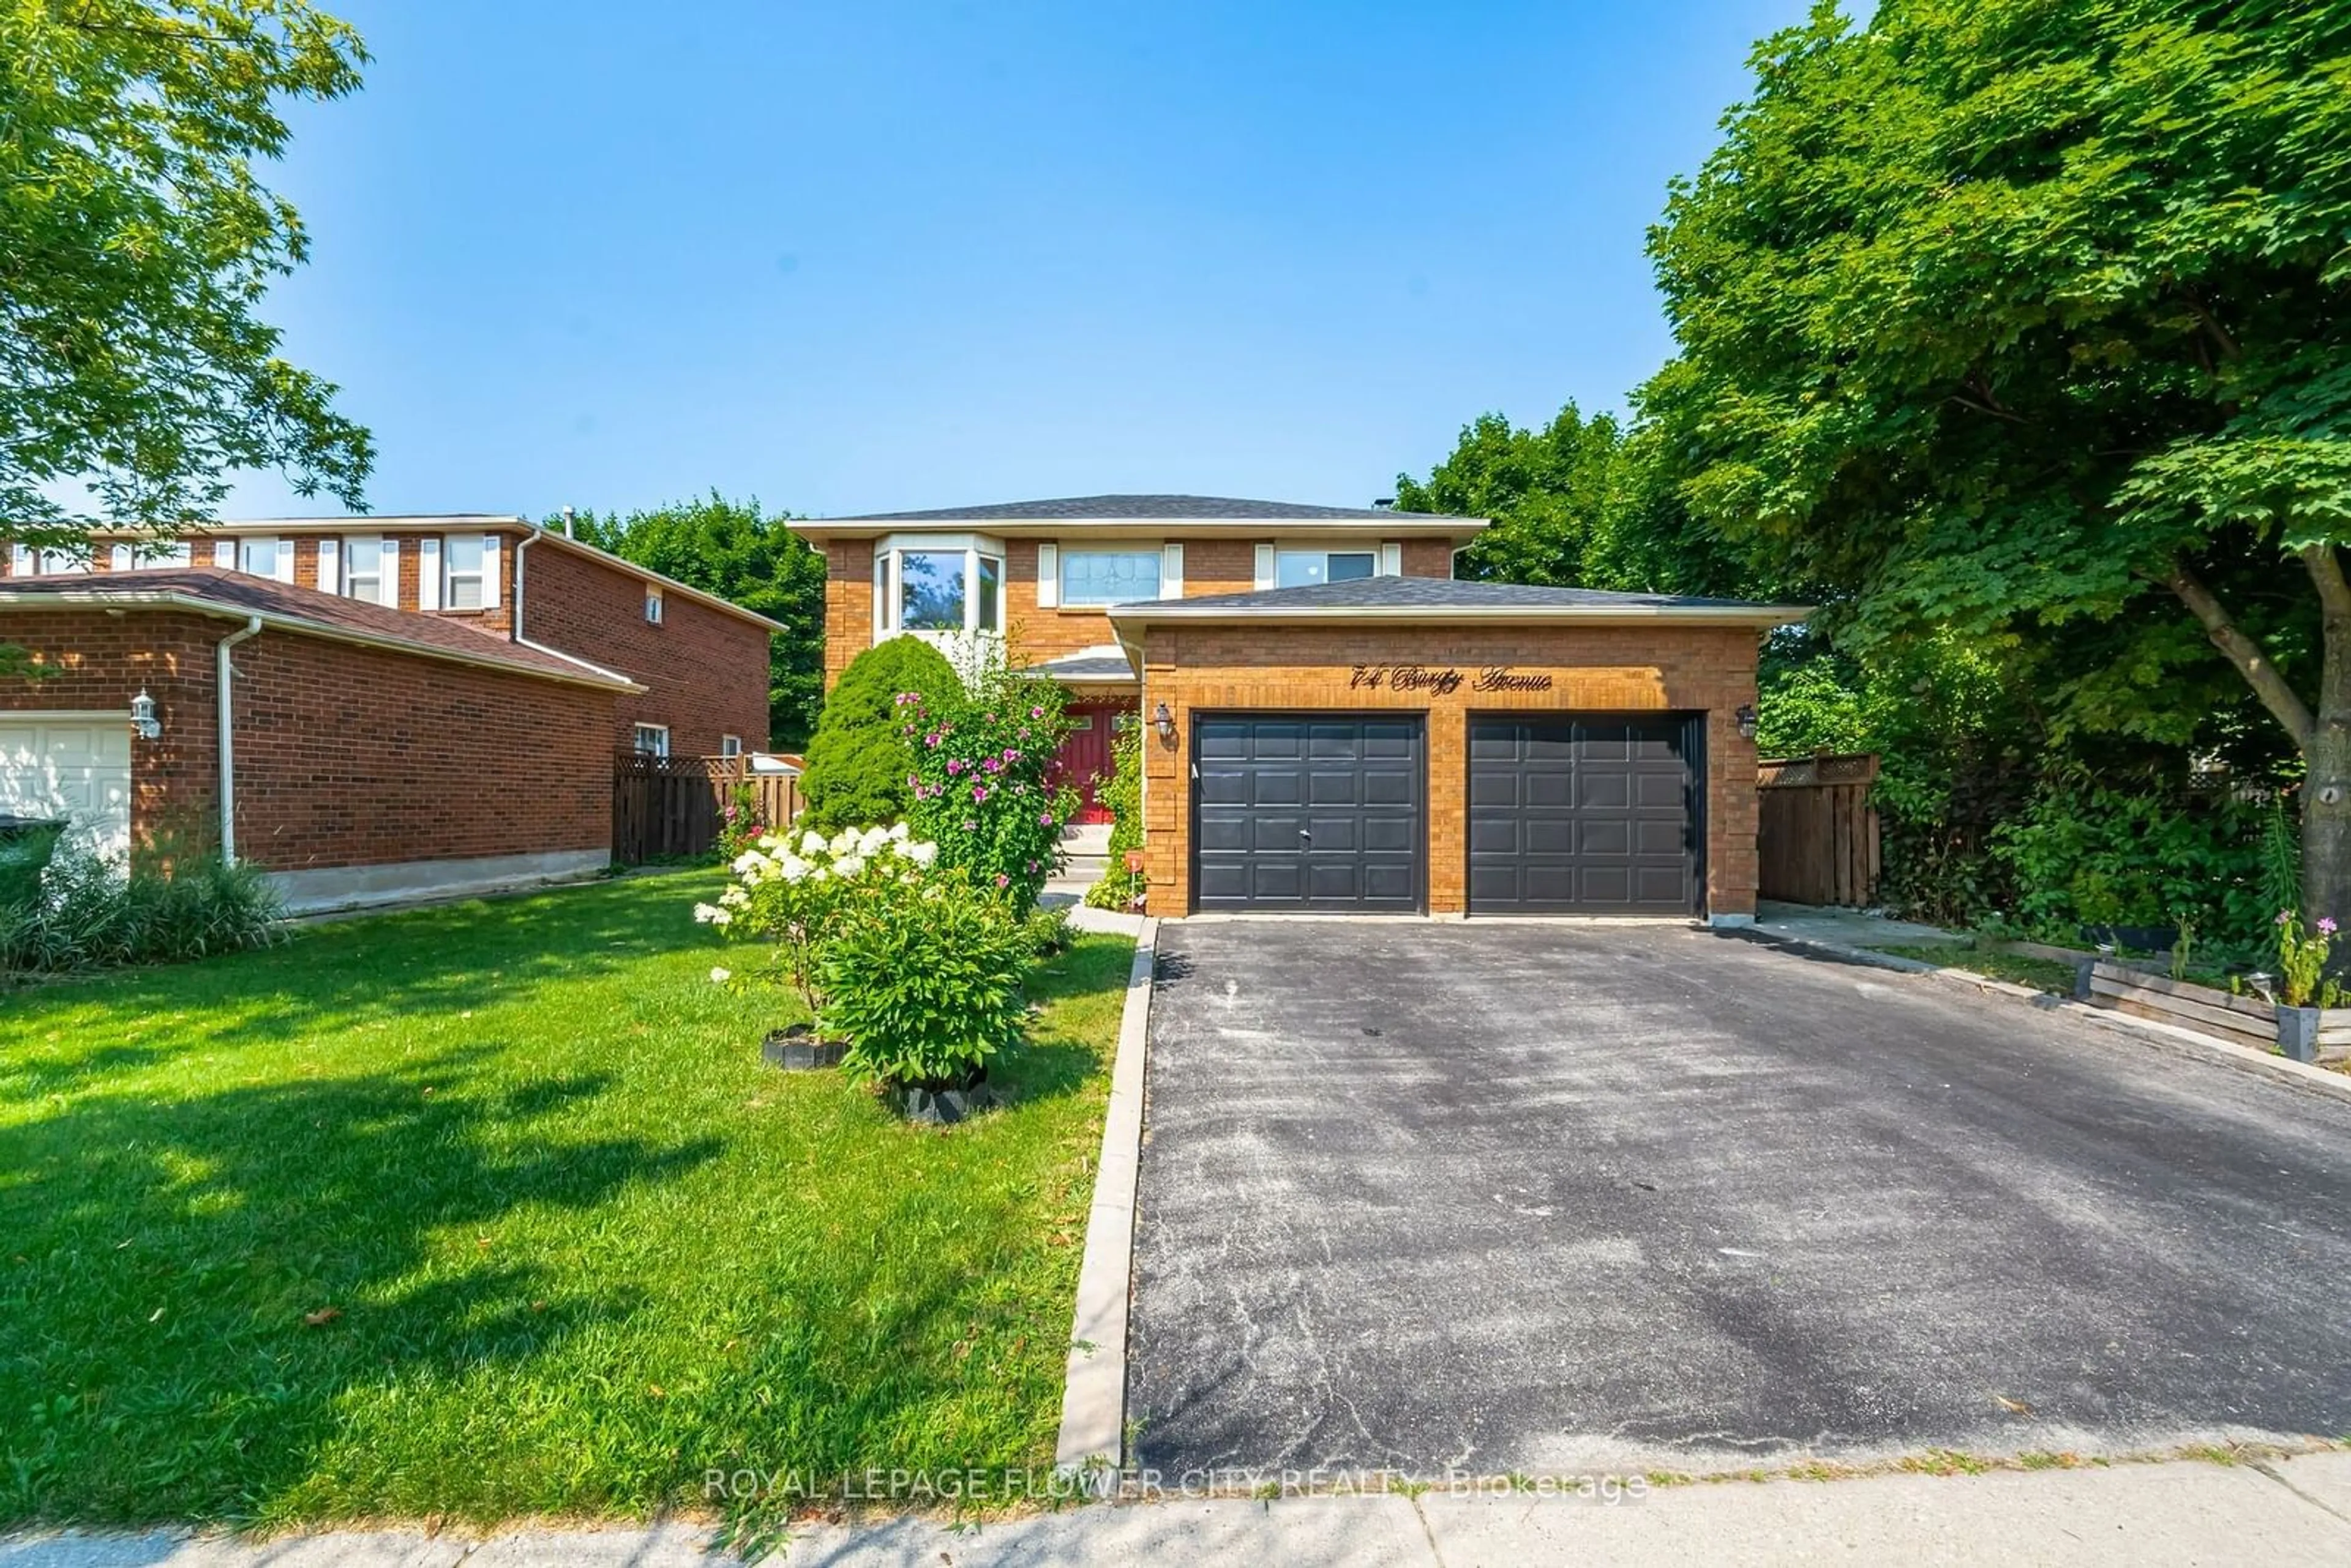 Home with brick exterior material for 74 Burgby Ave, Brampton Ontario L6X 3A4